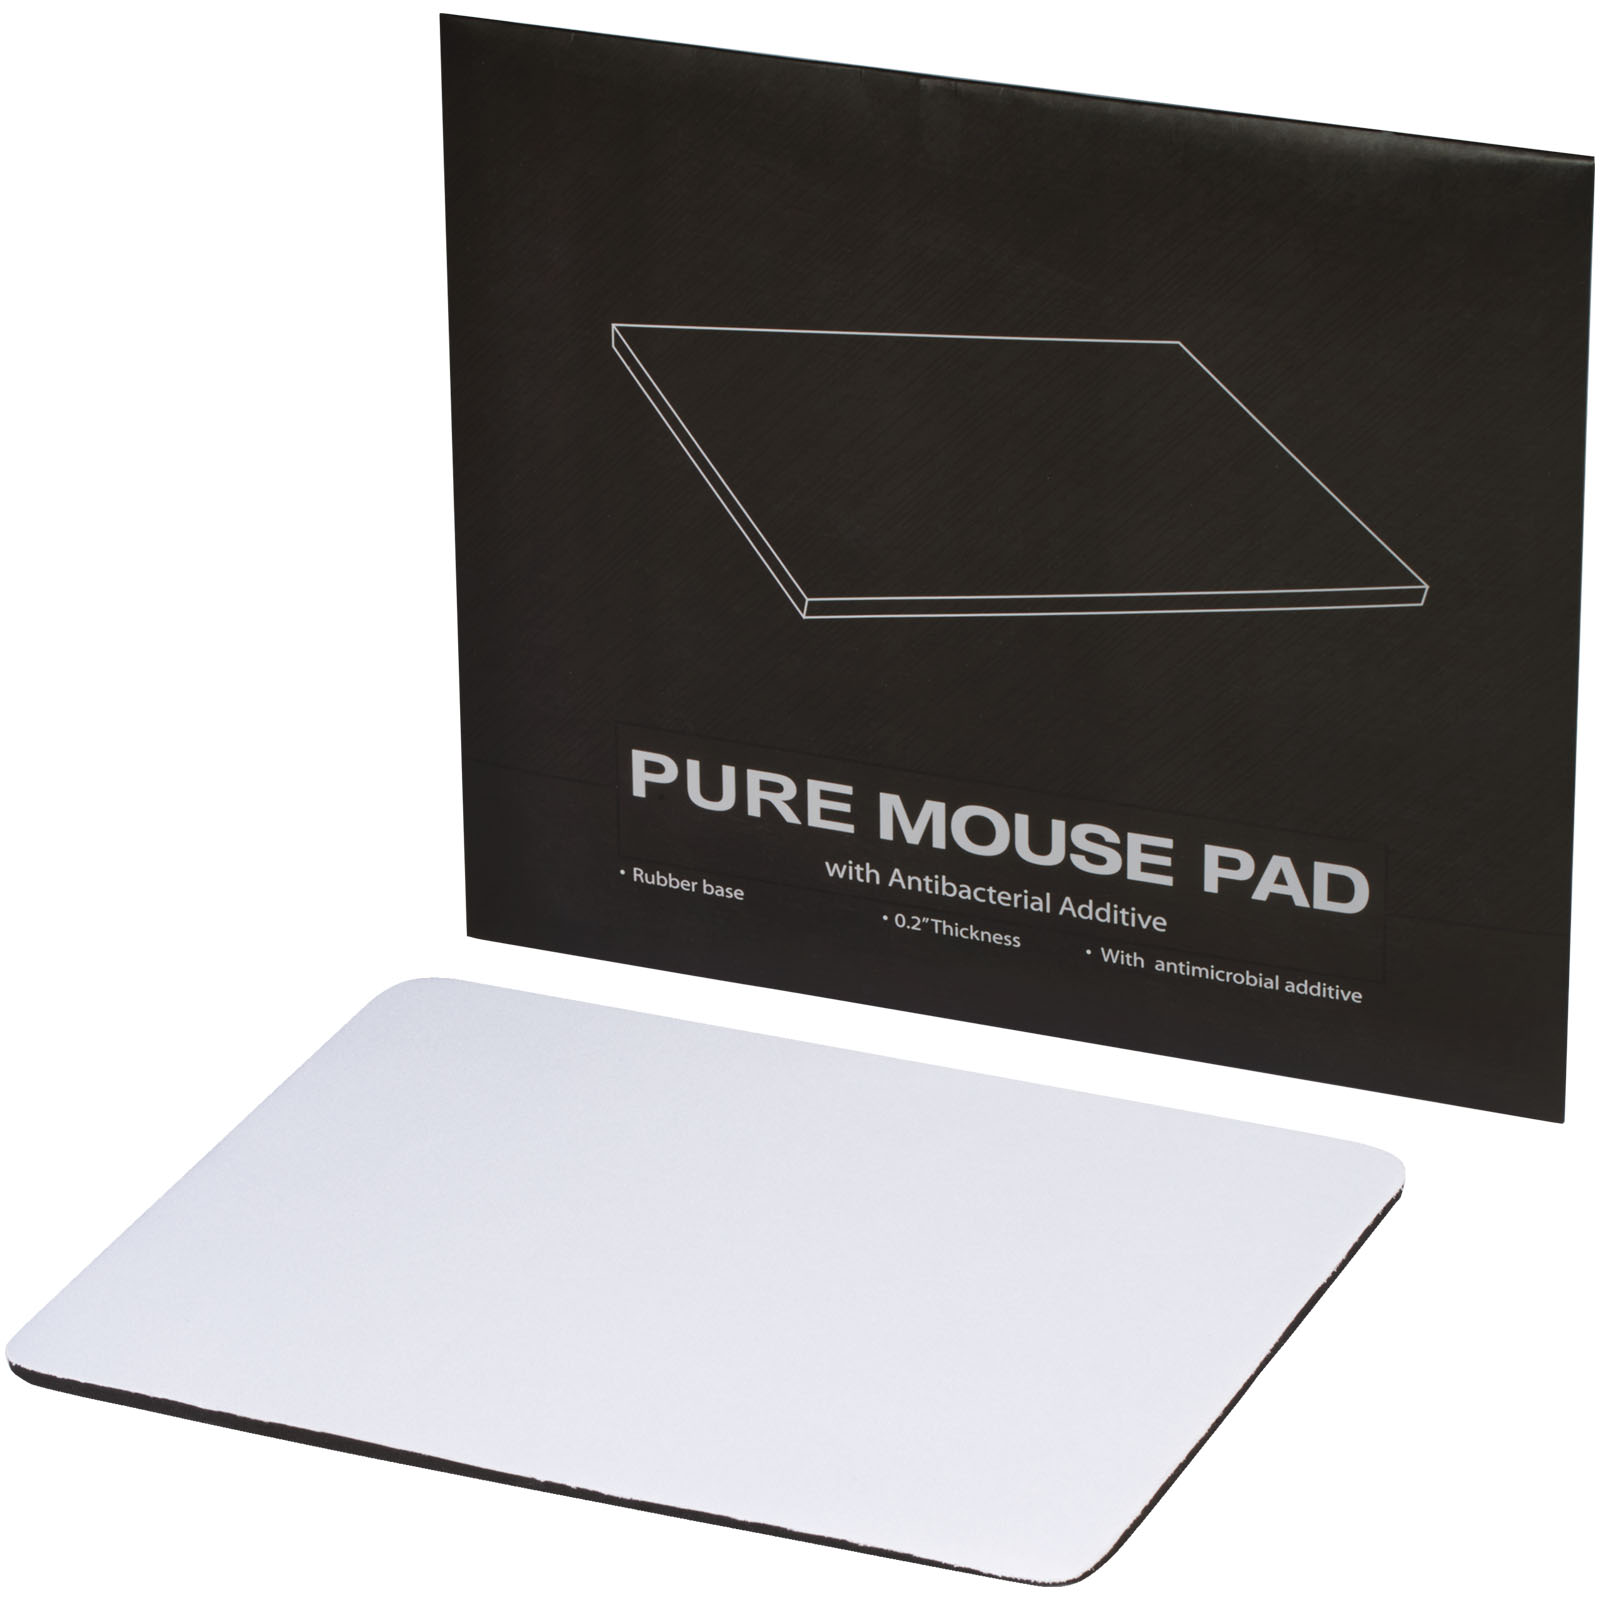 Advertising Computer Accessories - Pure mouse pad with antibacterial additive - 4